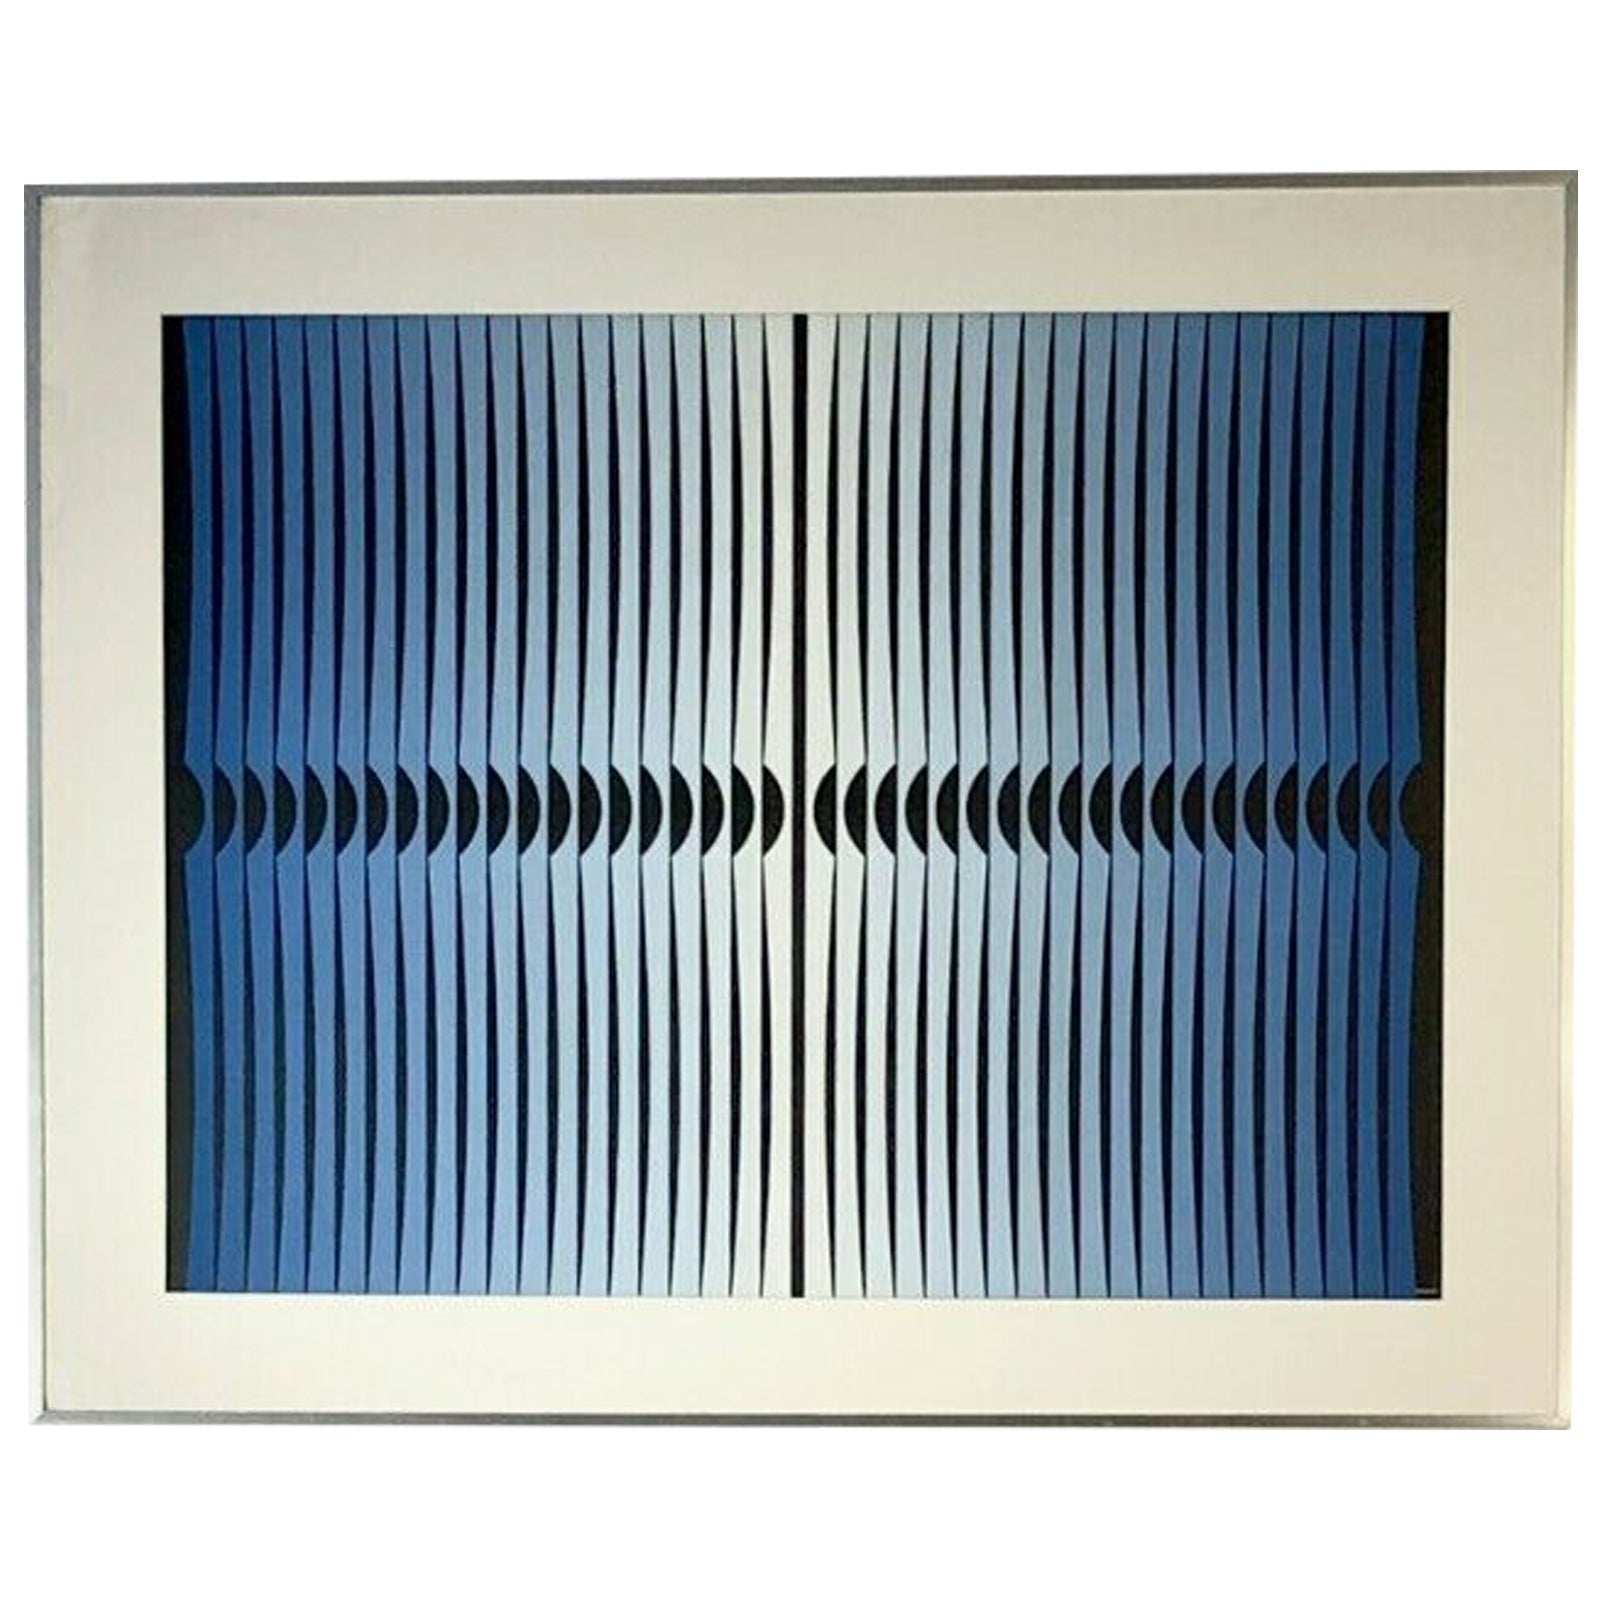 Kinetics Optical Op-Art GOUACHE PAINTING by DORDEVIC MIODRAG, France 1960